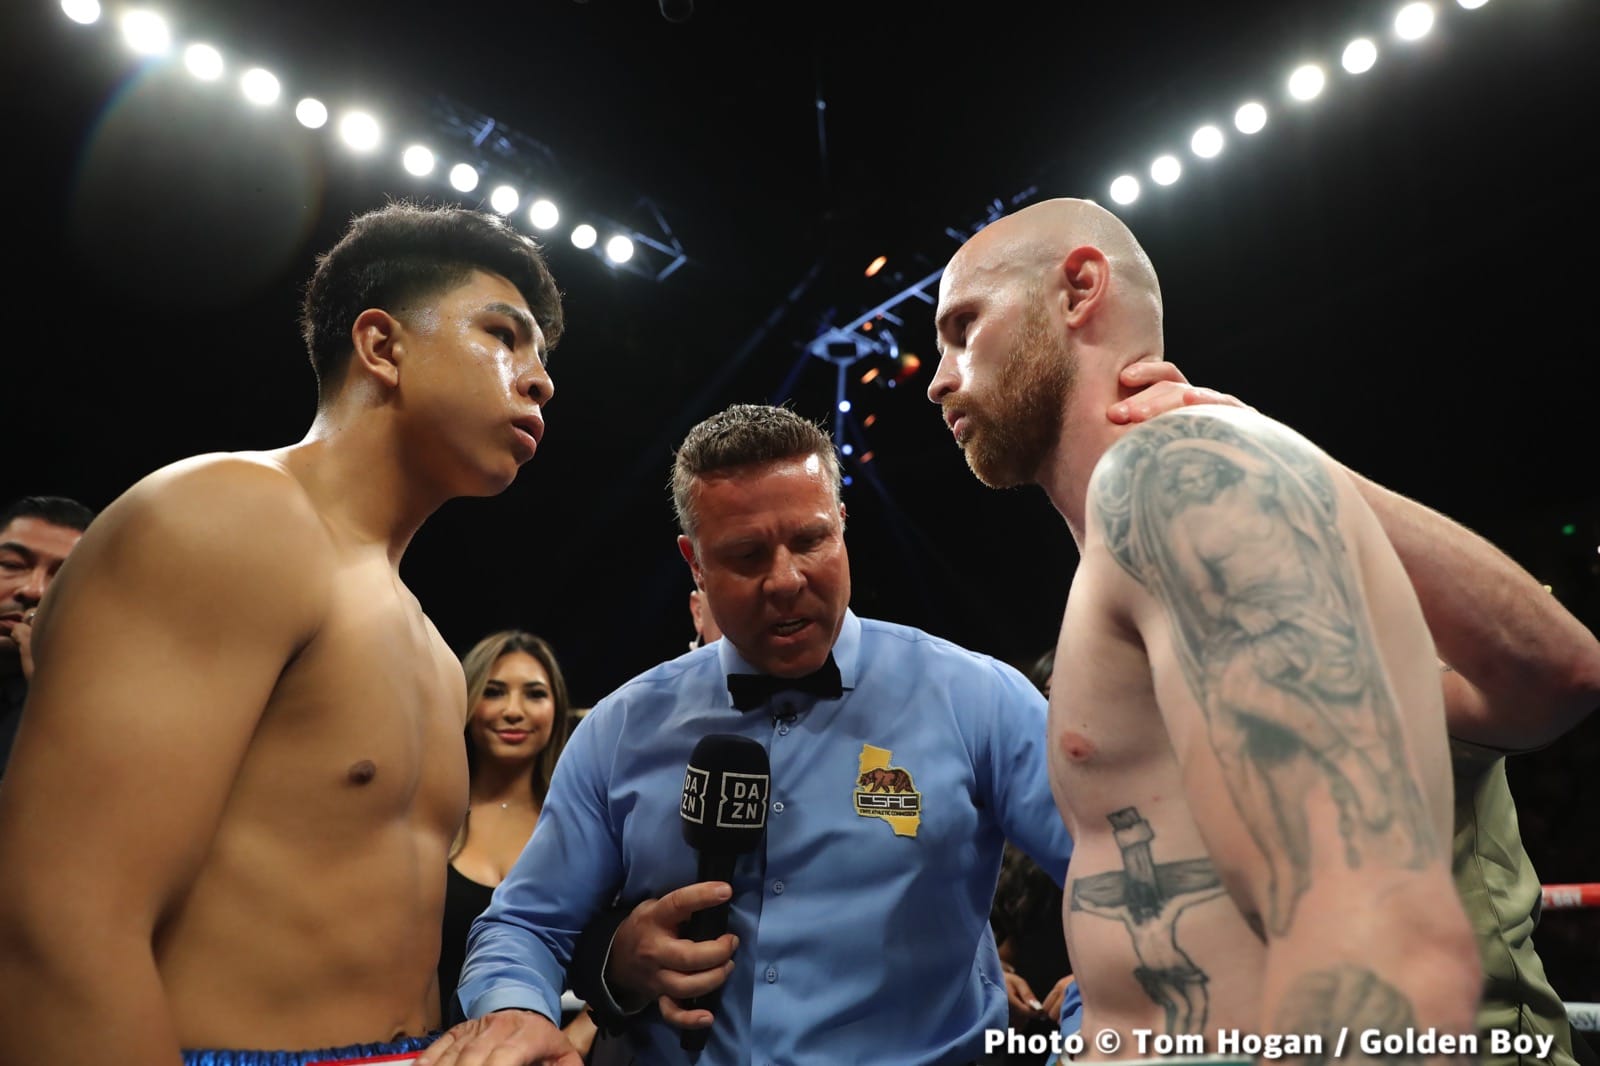 Munguia stops Kelly in 5th round KO - Boxing Results